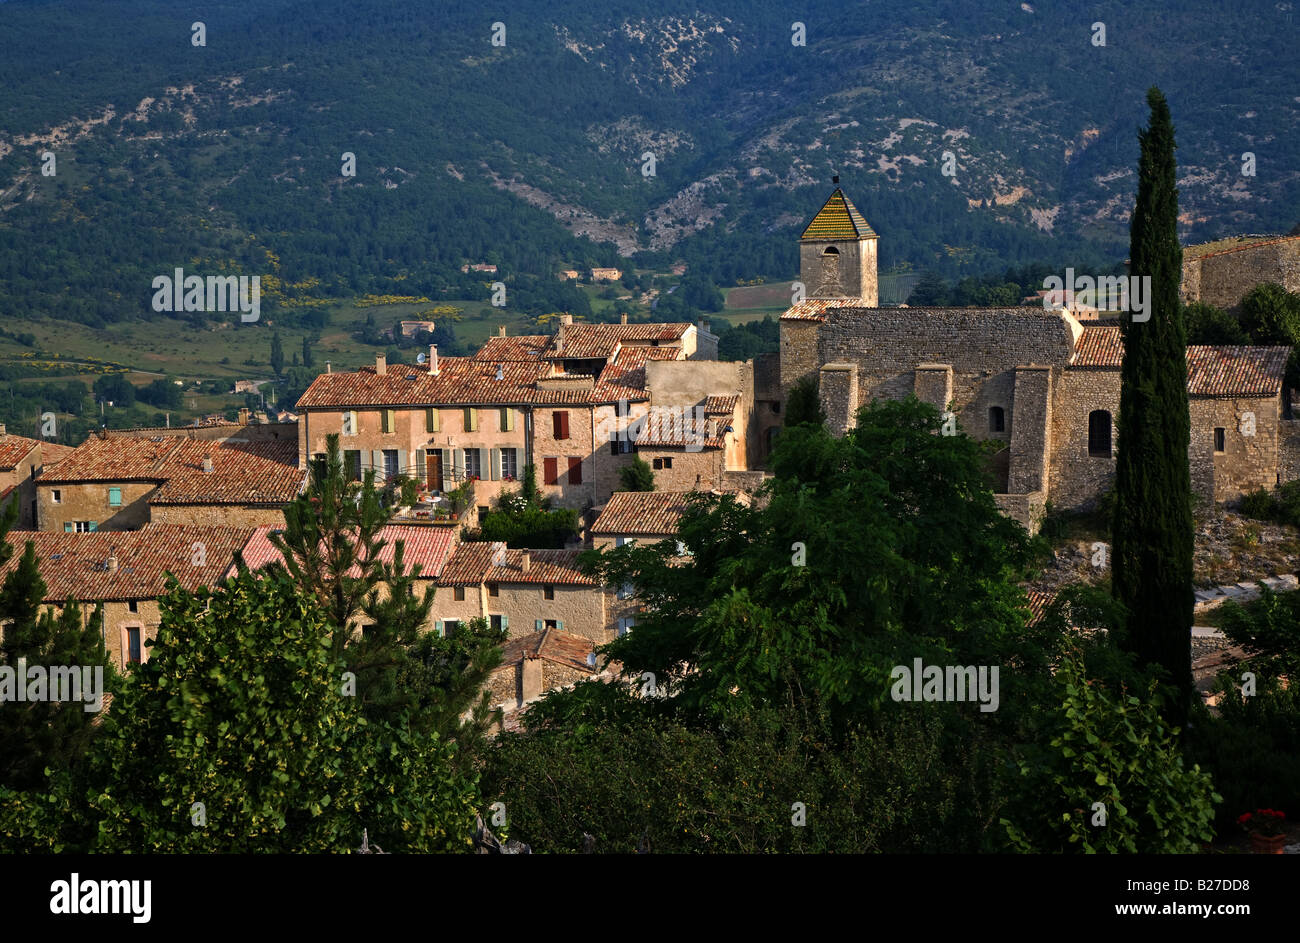 Aurel, a delightful village in the Sault region on the border of the Vaucluse, Provence. Stock Photo